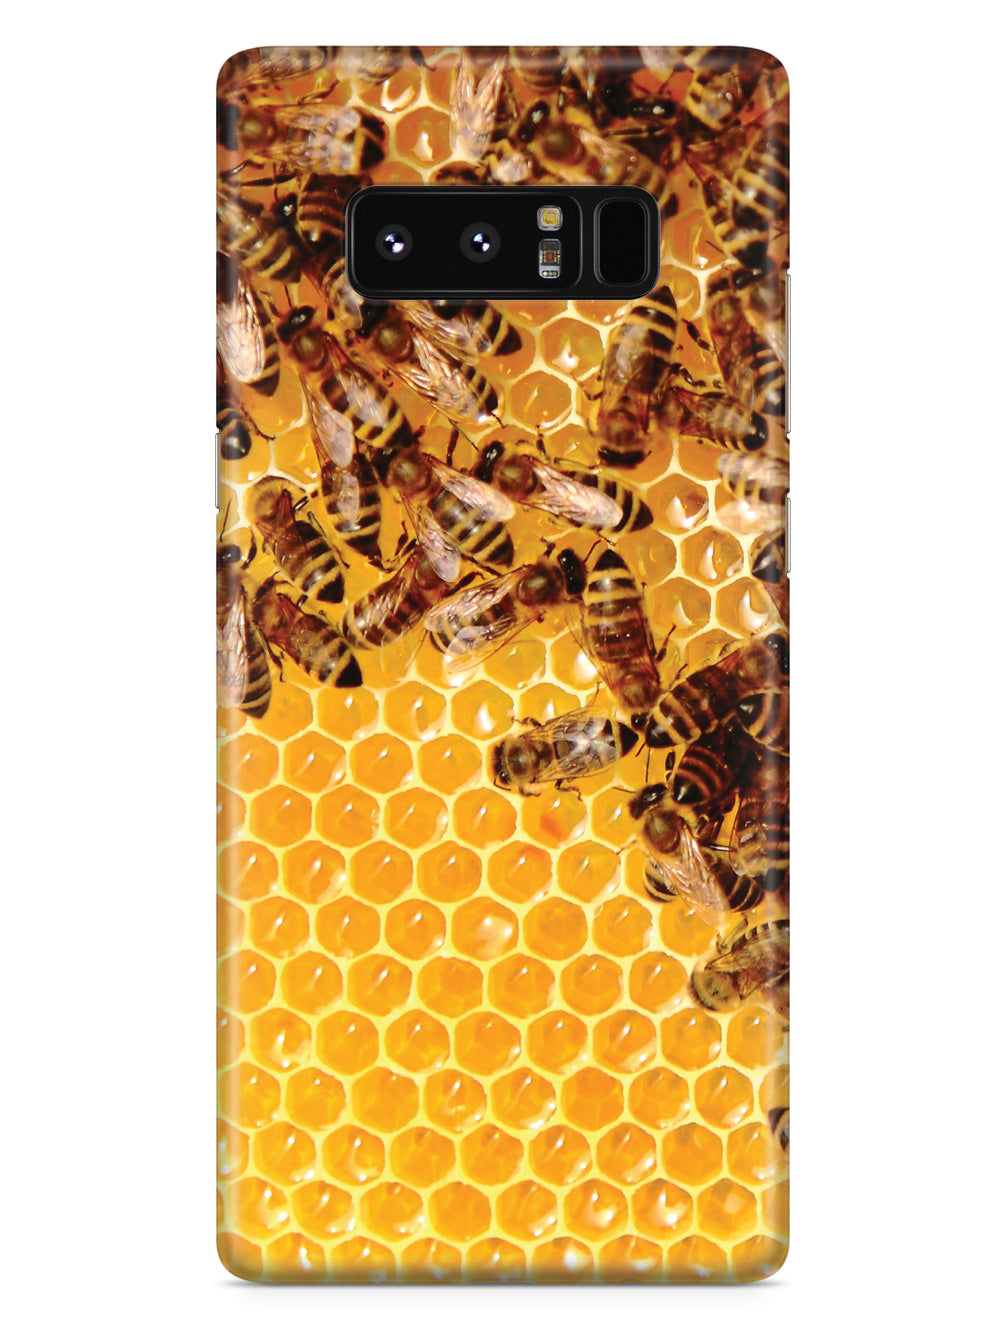 Honey Bees - Real Life Case